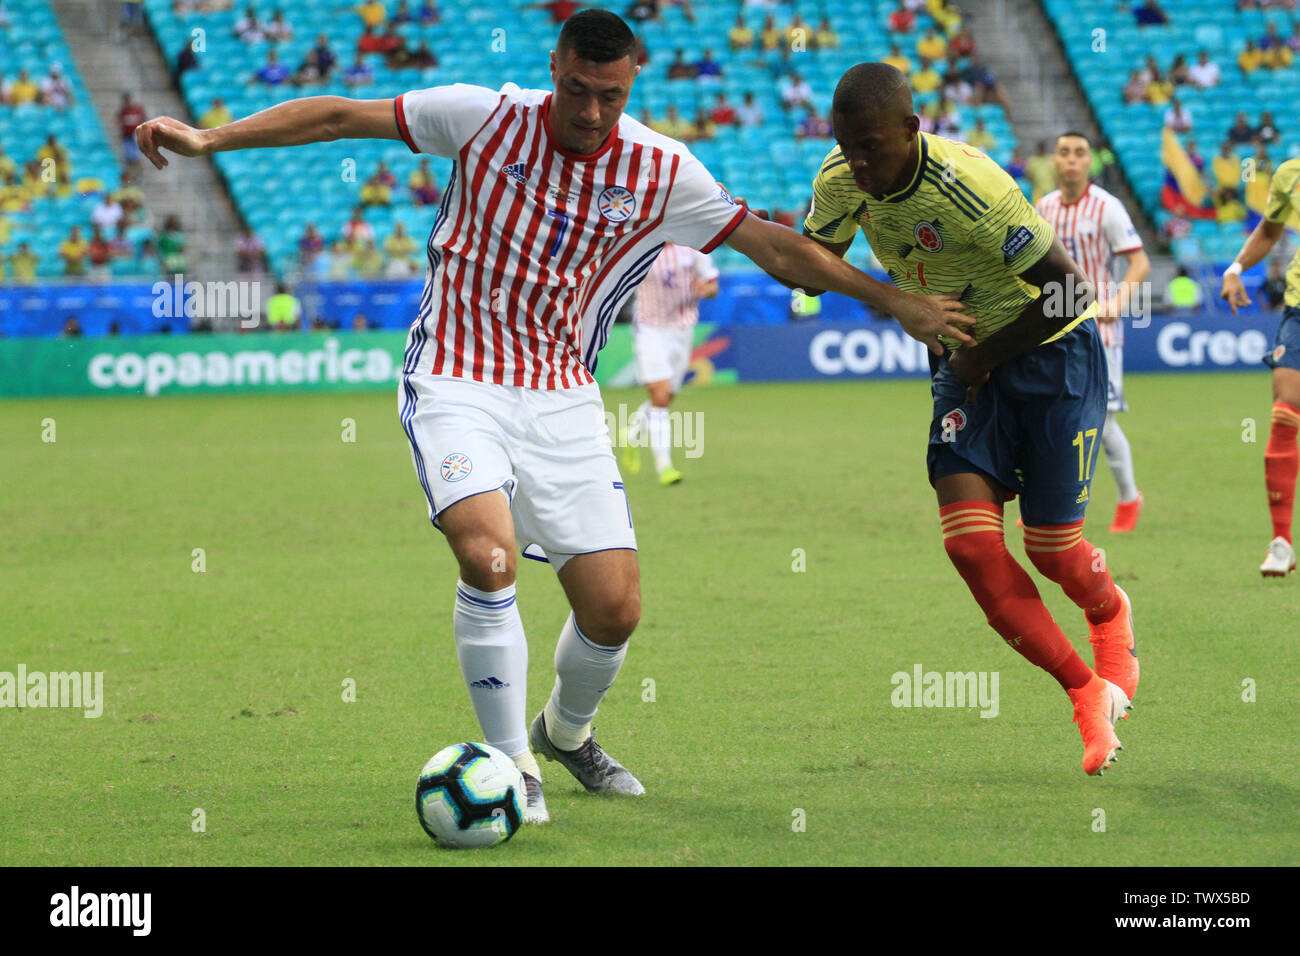 Salvador, Brazil. 23rd June, 2019. Oscar Cardozo tries to leave the mark of Cristian Borja during a match between Colombia and Paraguay, valid for the group stage of Copa America 2019, held this Sunday (23) at the Arena Fonte Nova in Salvador, BA. Credit: Mauro Akiin Nassor/FotoArena/Alamy Live News Stock Photo